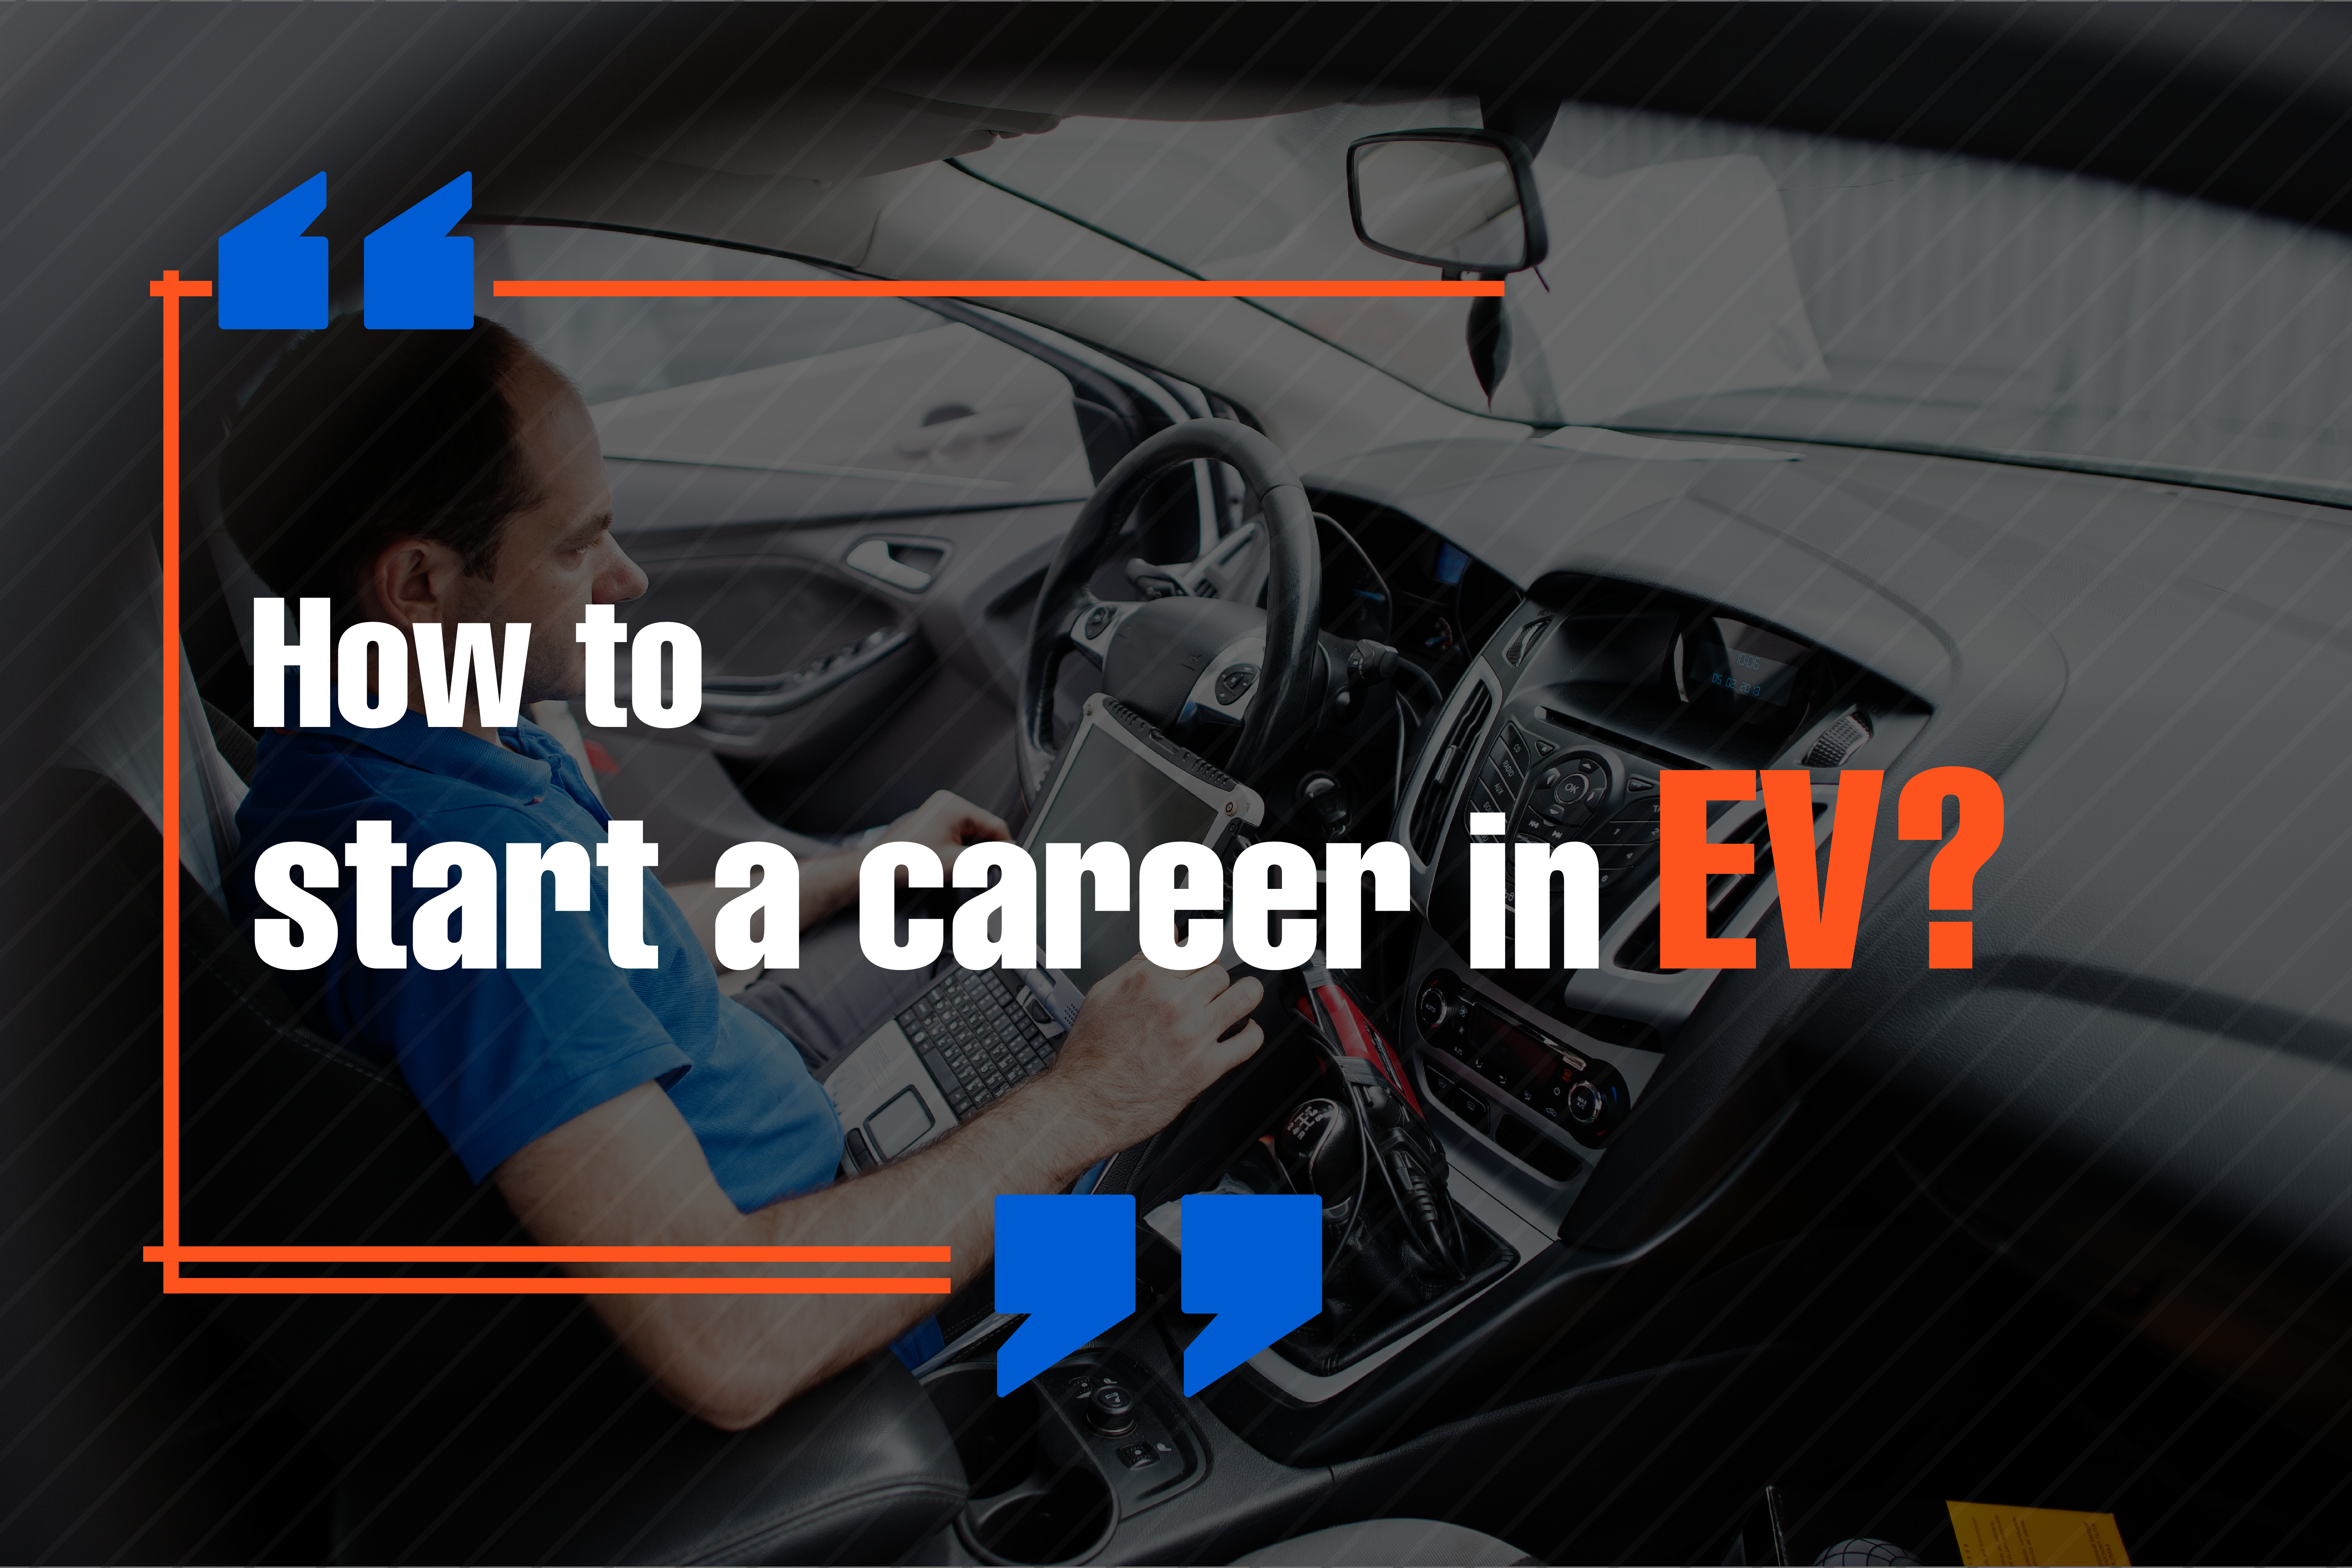 How to start a career in EV? 
Your Roadmap to Become an Electrical Vehicle Engineer